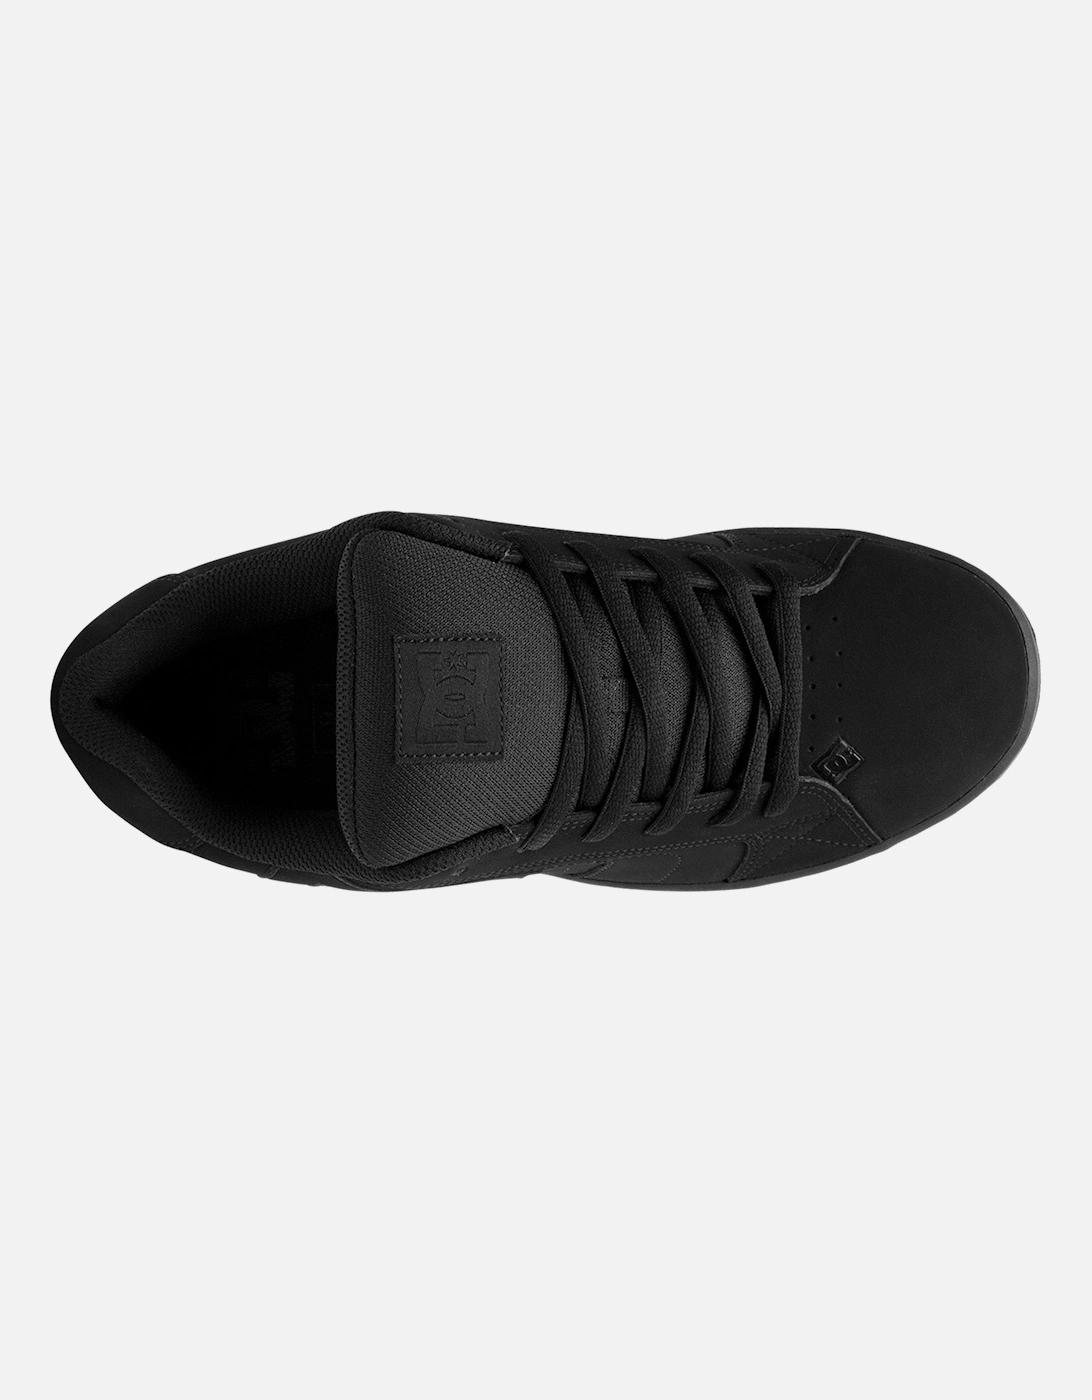 Mens Net Leather Trainers - Black